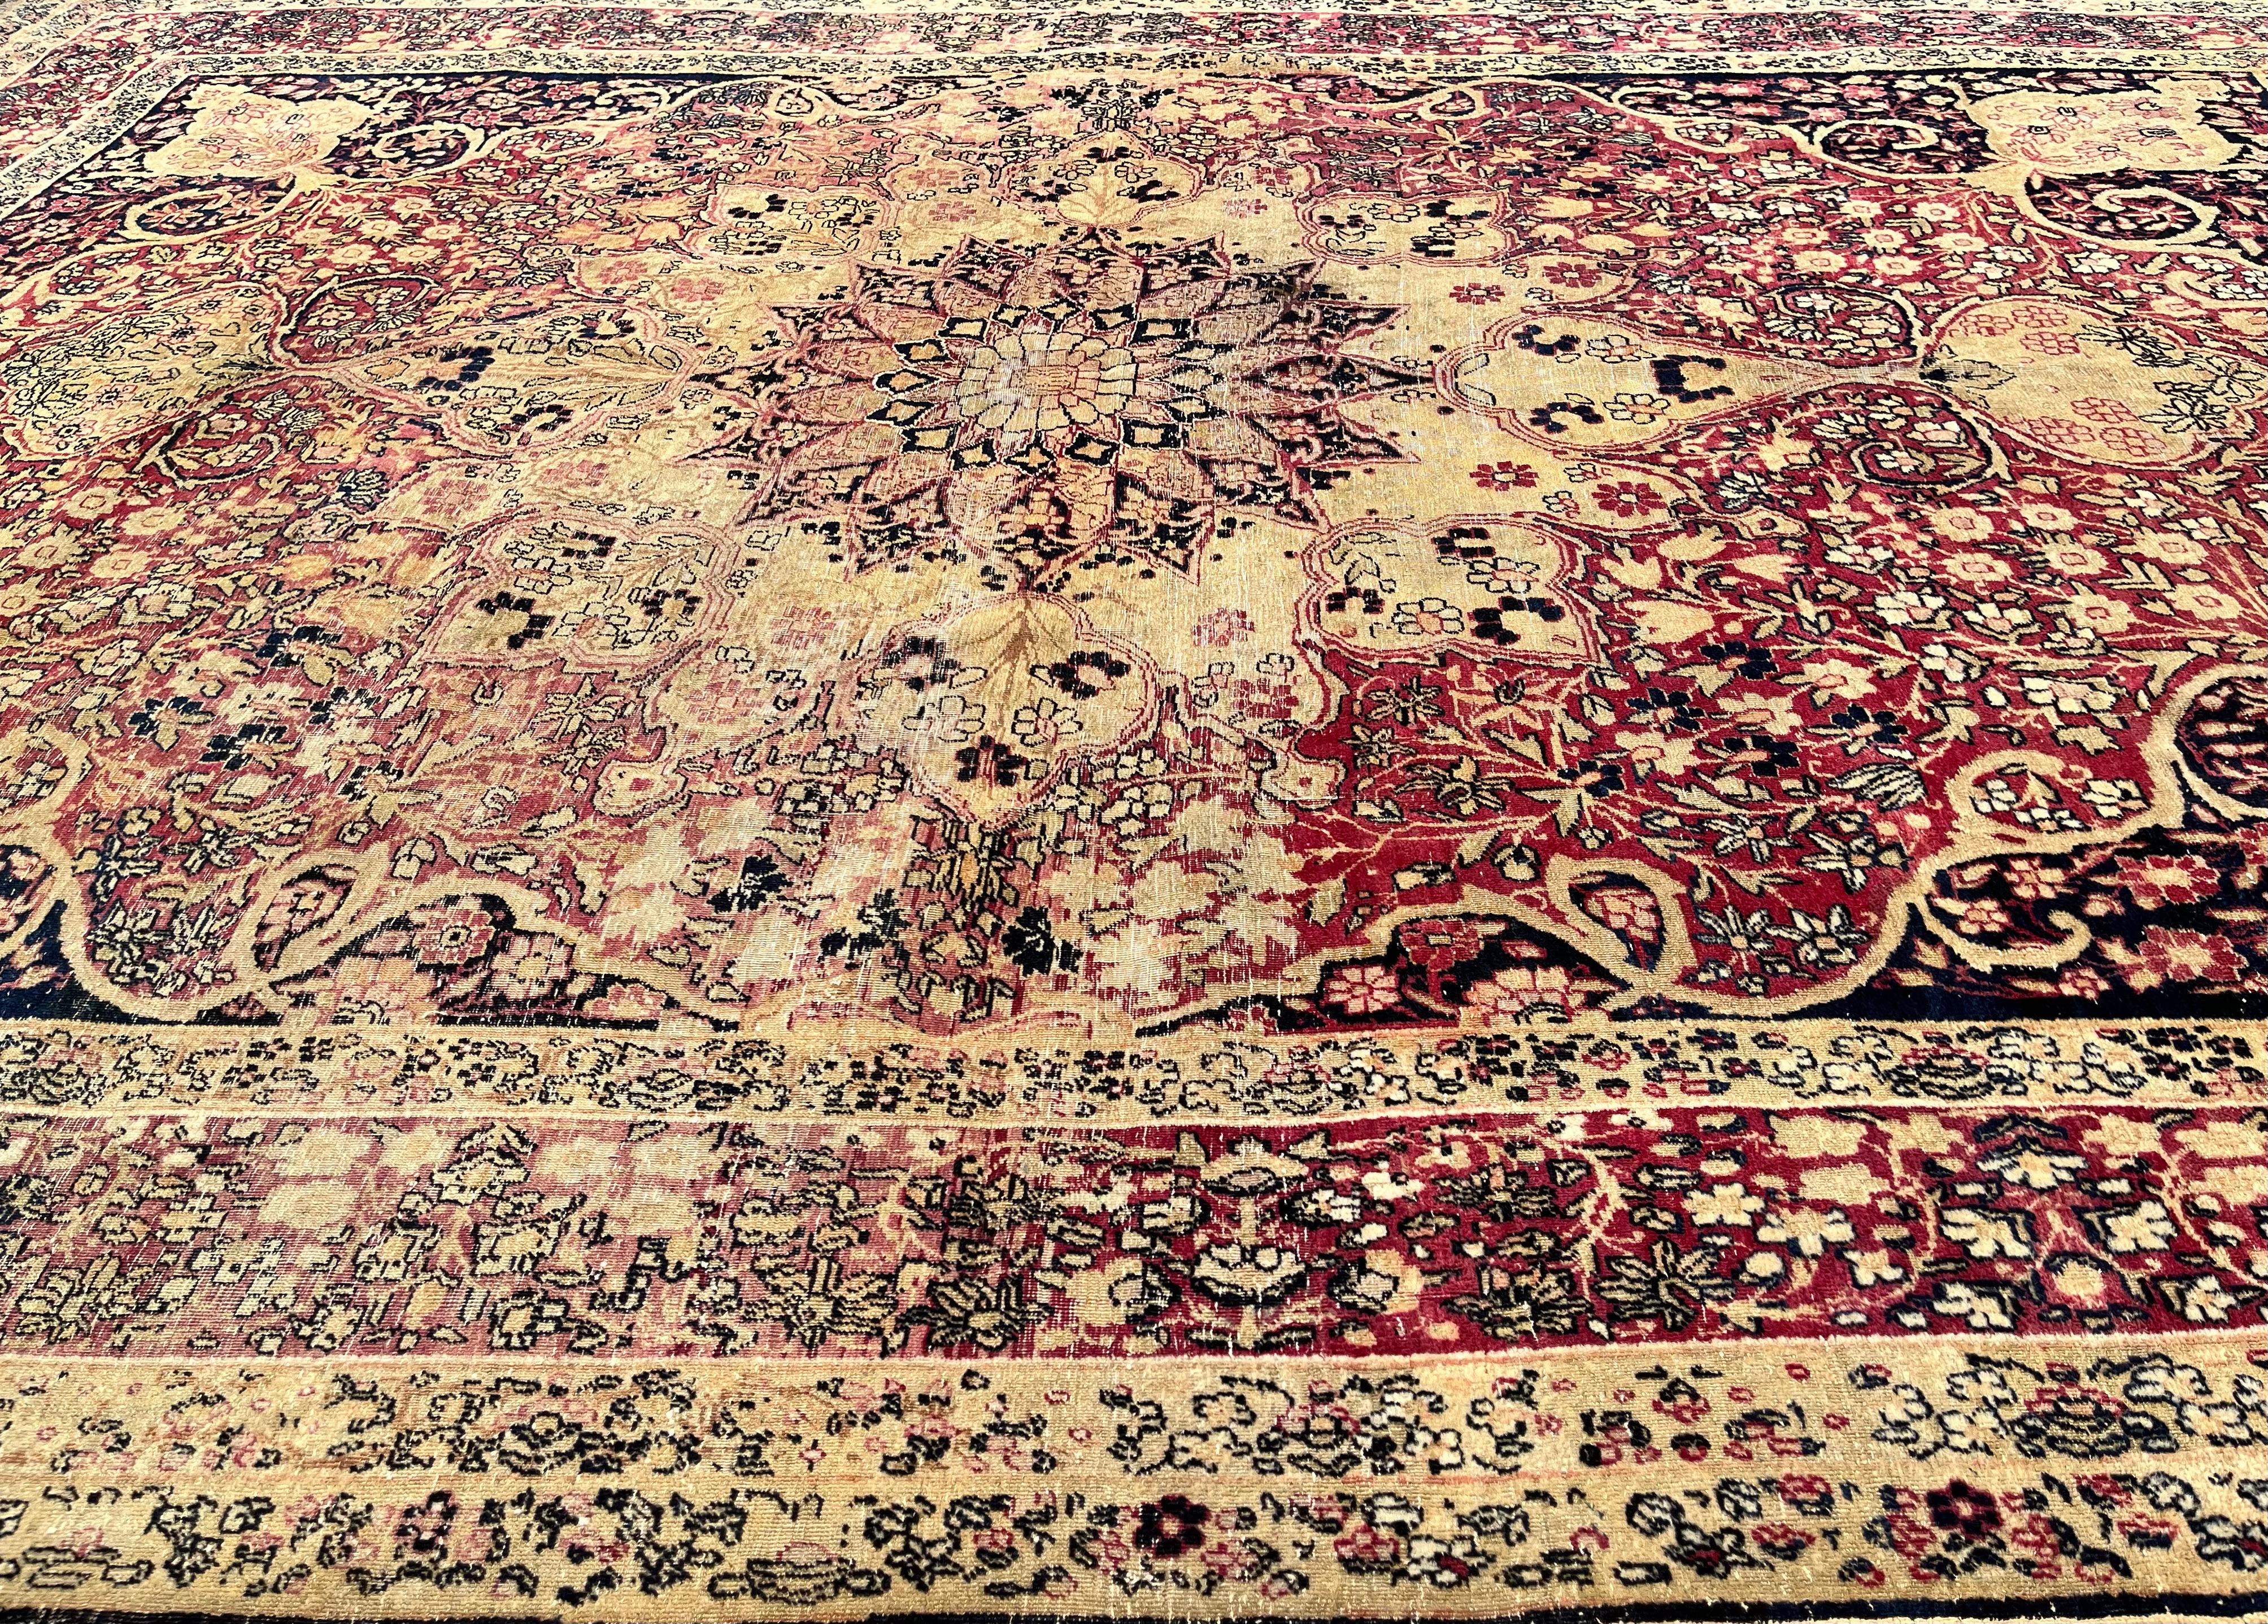 Hand-Woven Antique Rug  Kirman Raver. Late 19th For Sale